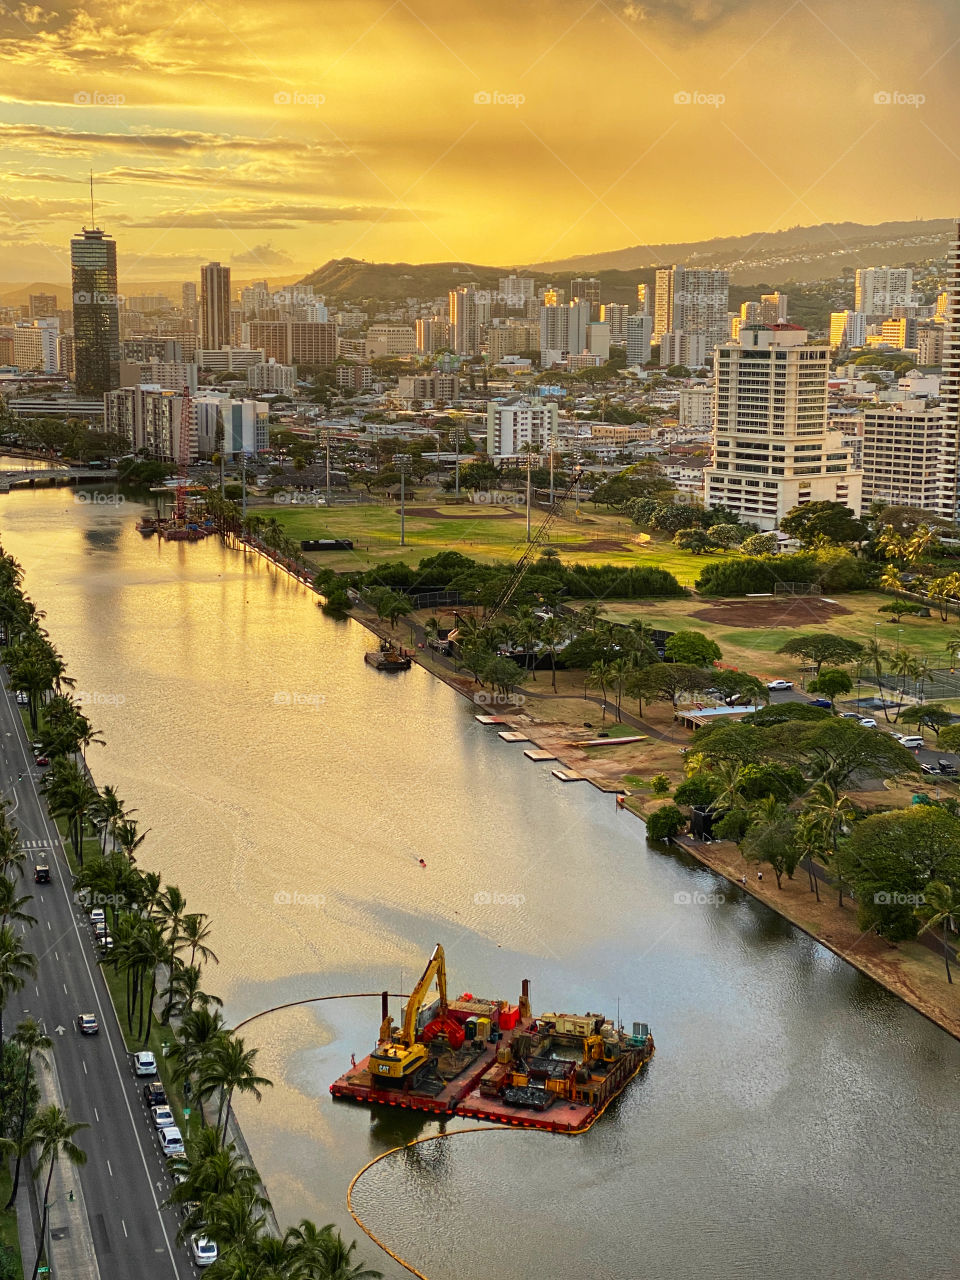 Dredging platform on the Ala Wai Canal in Honolulu, Hawaii at sunset